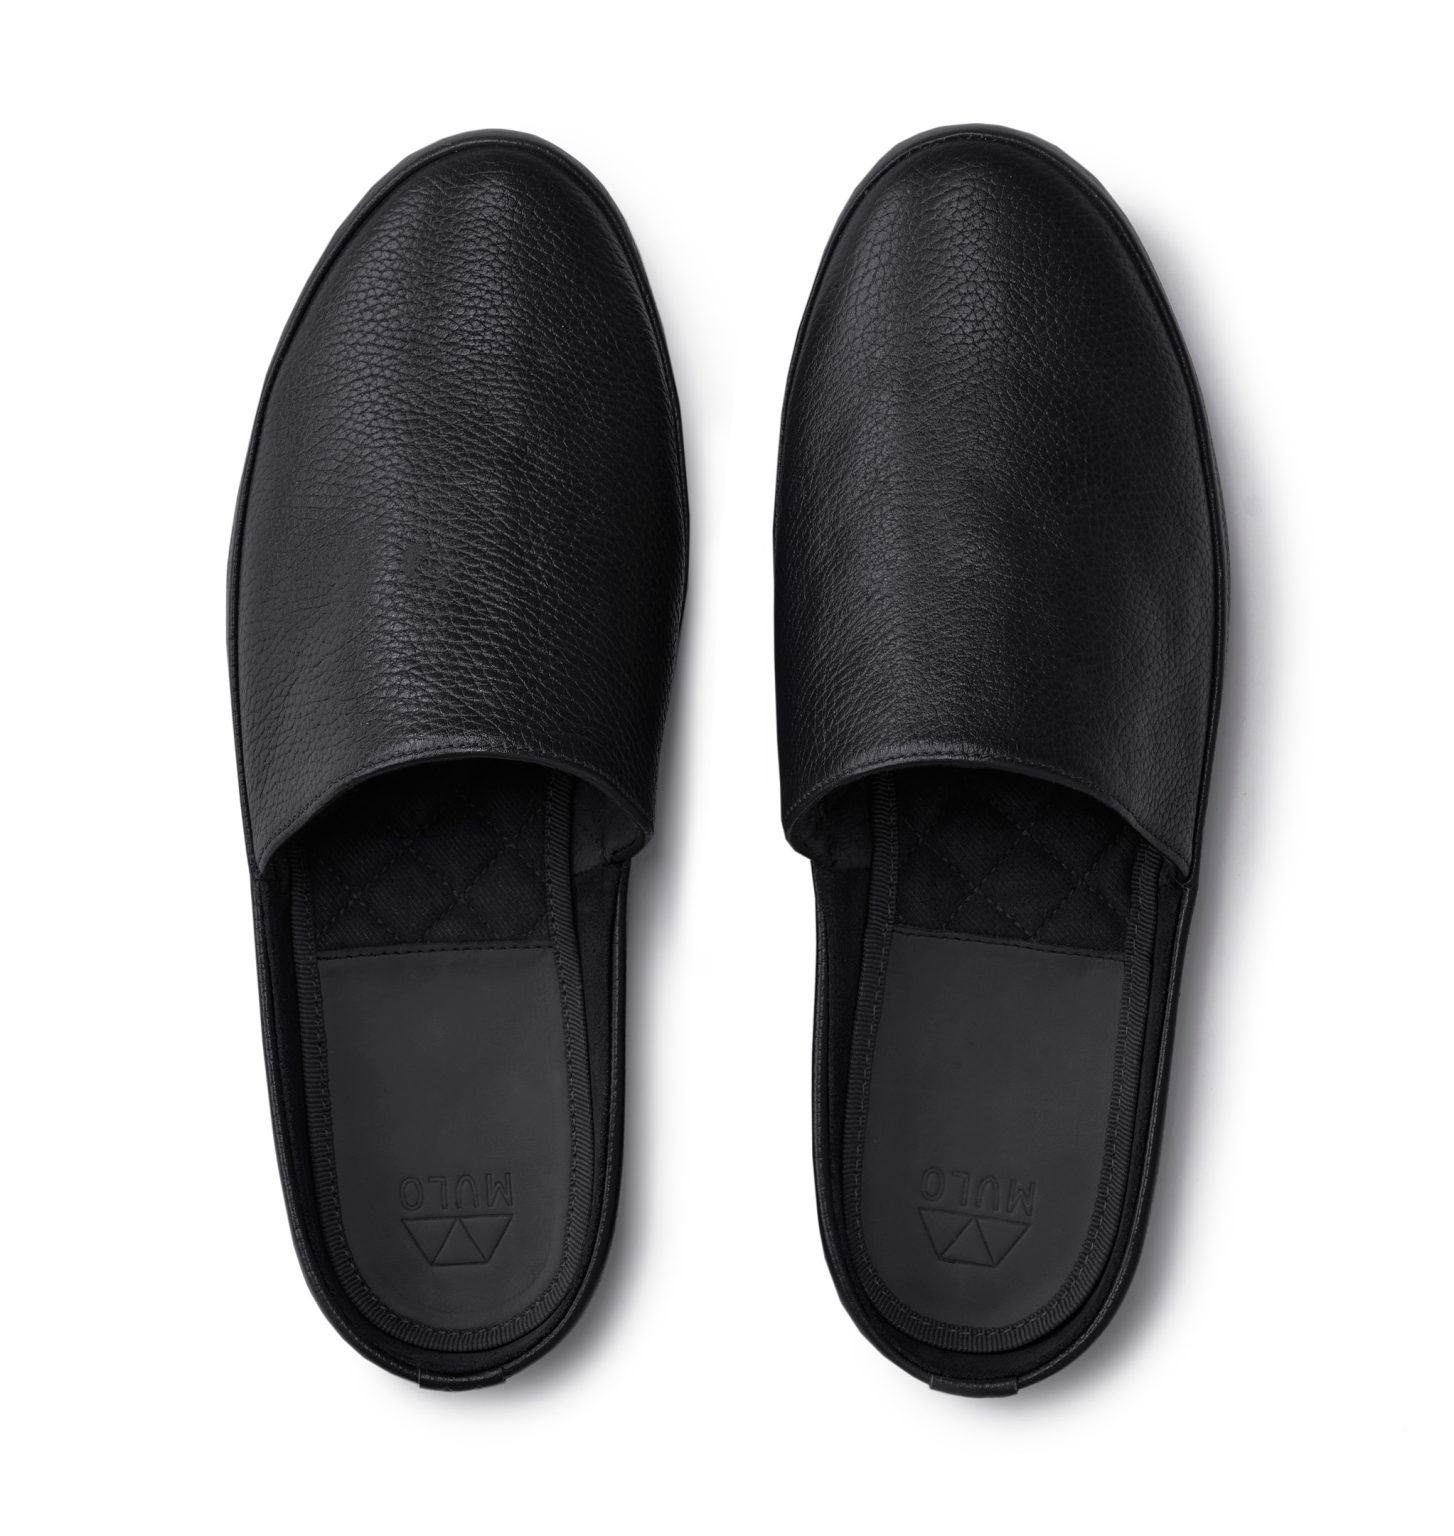 Mens Black Slippers In Leather 1 1454x1536 